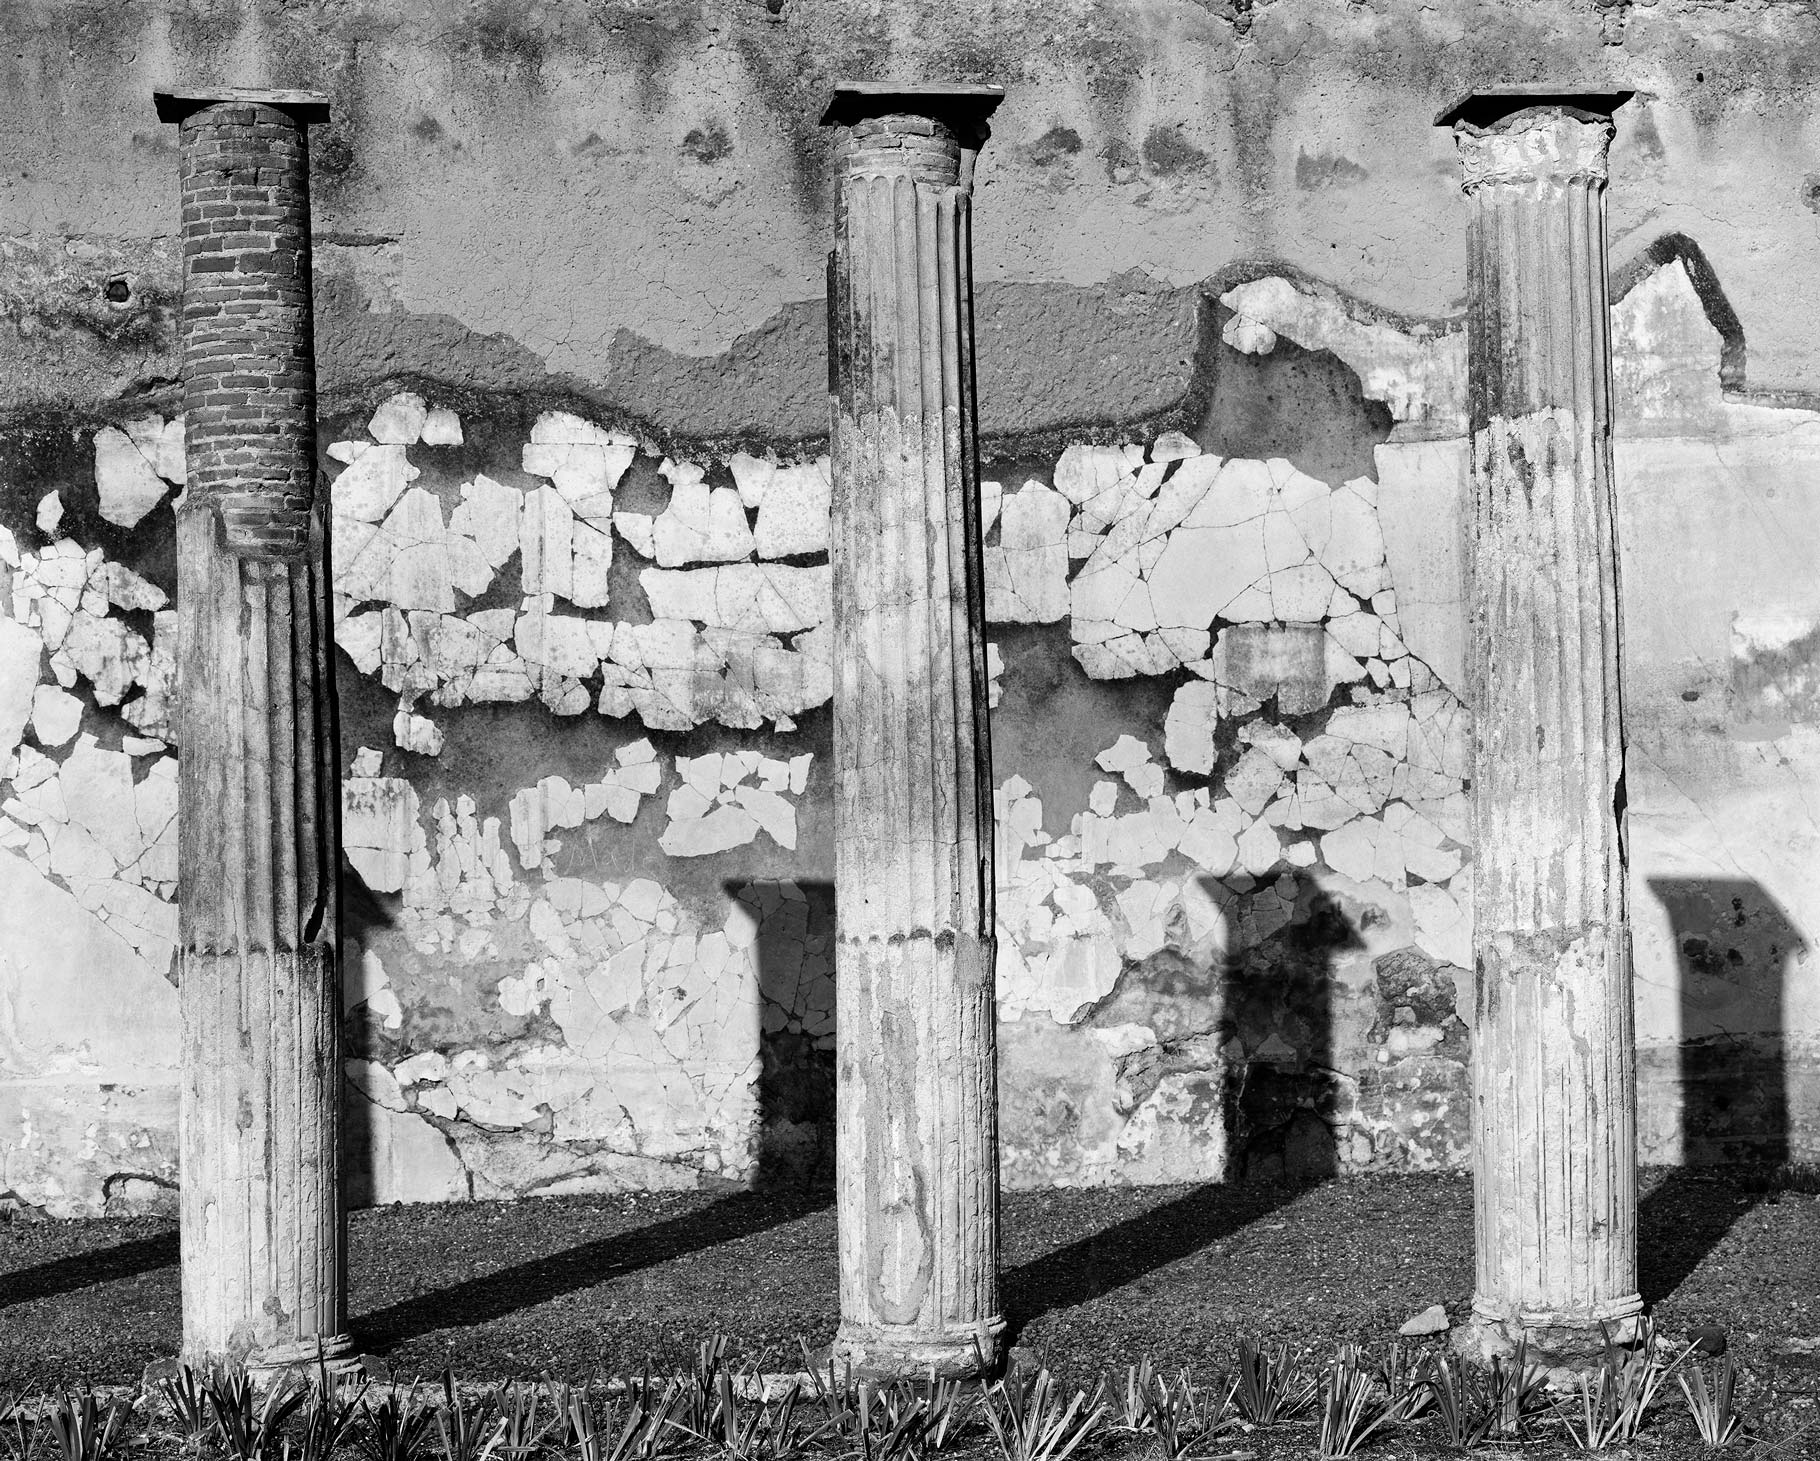 Pillars and broken wall in pompeii, black and white image